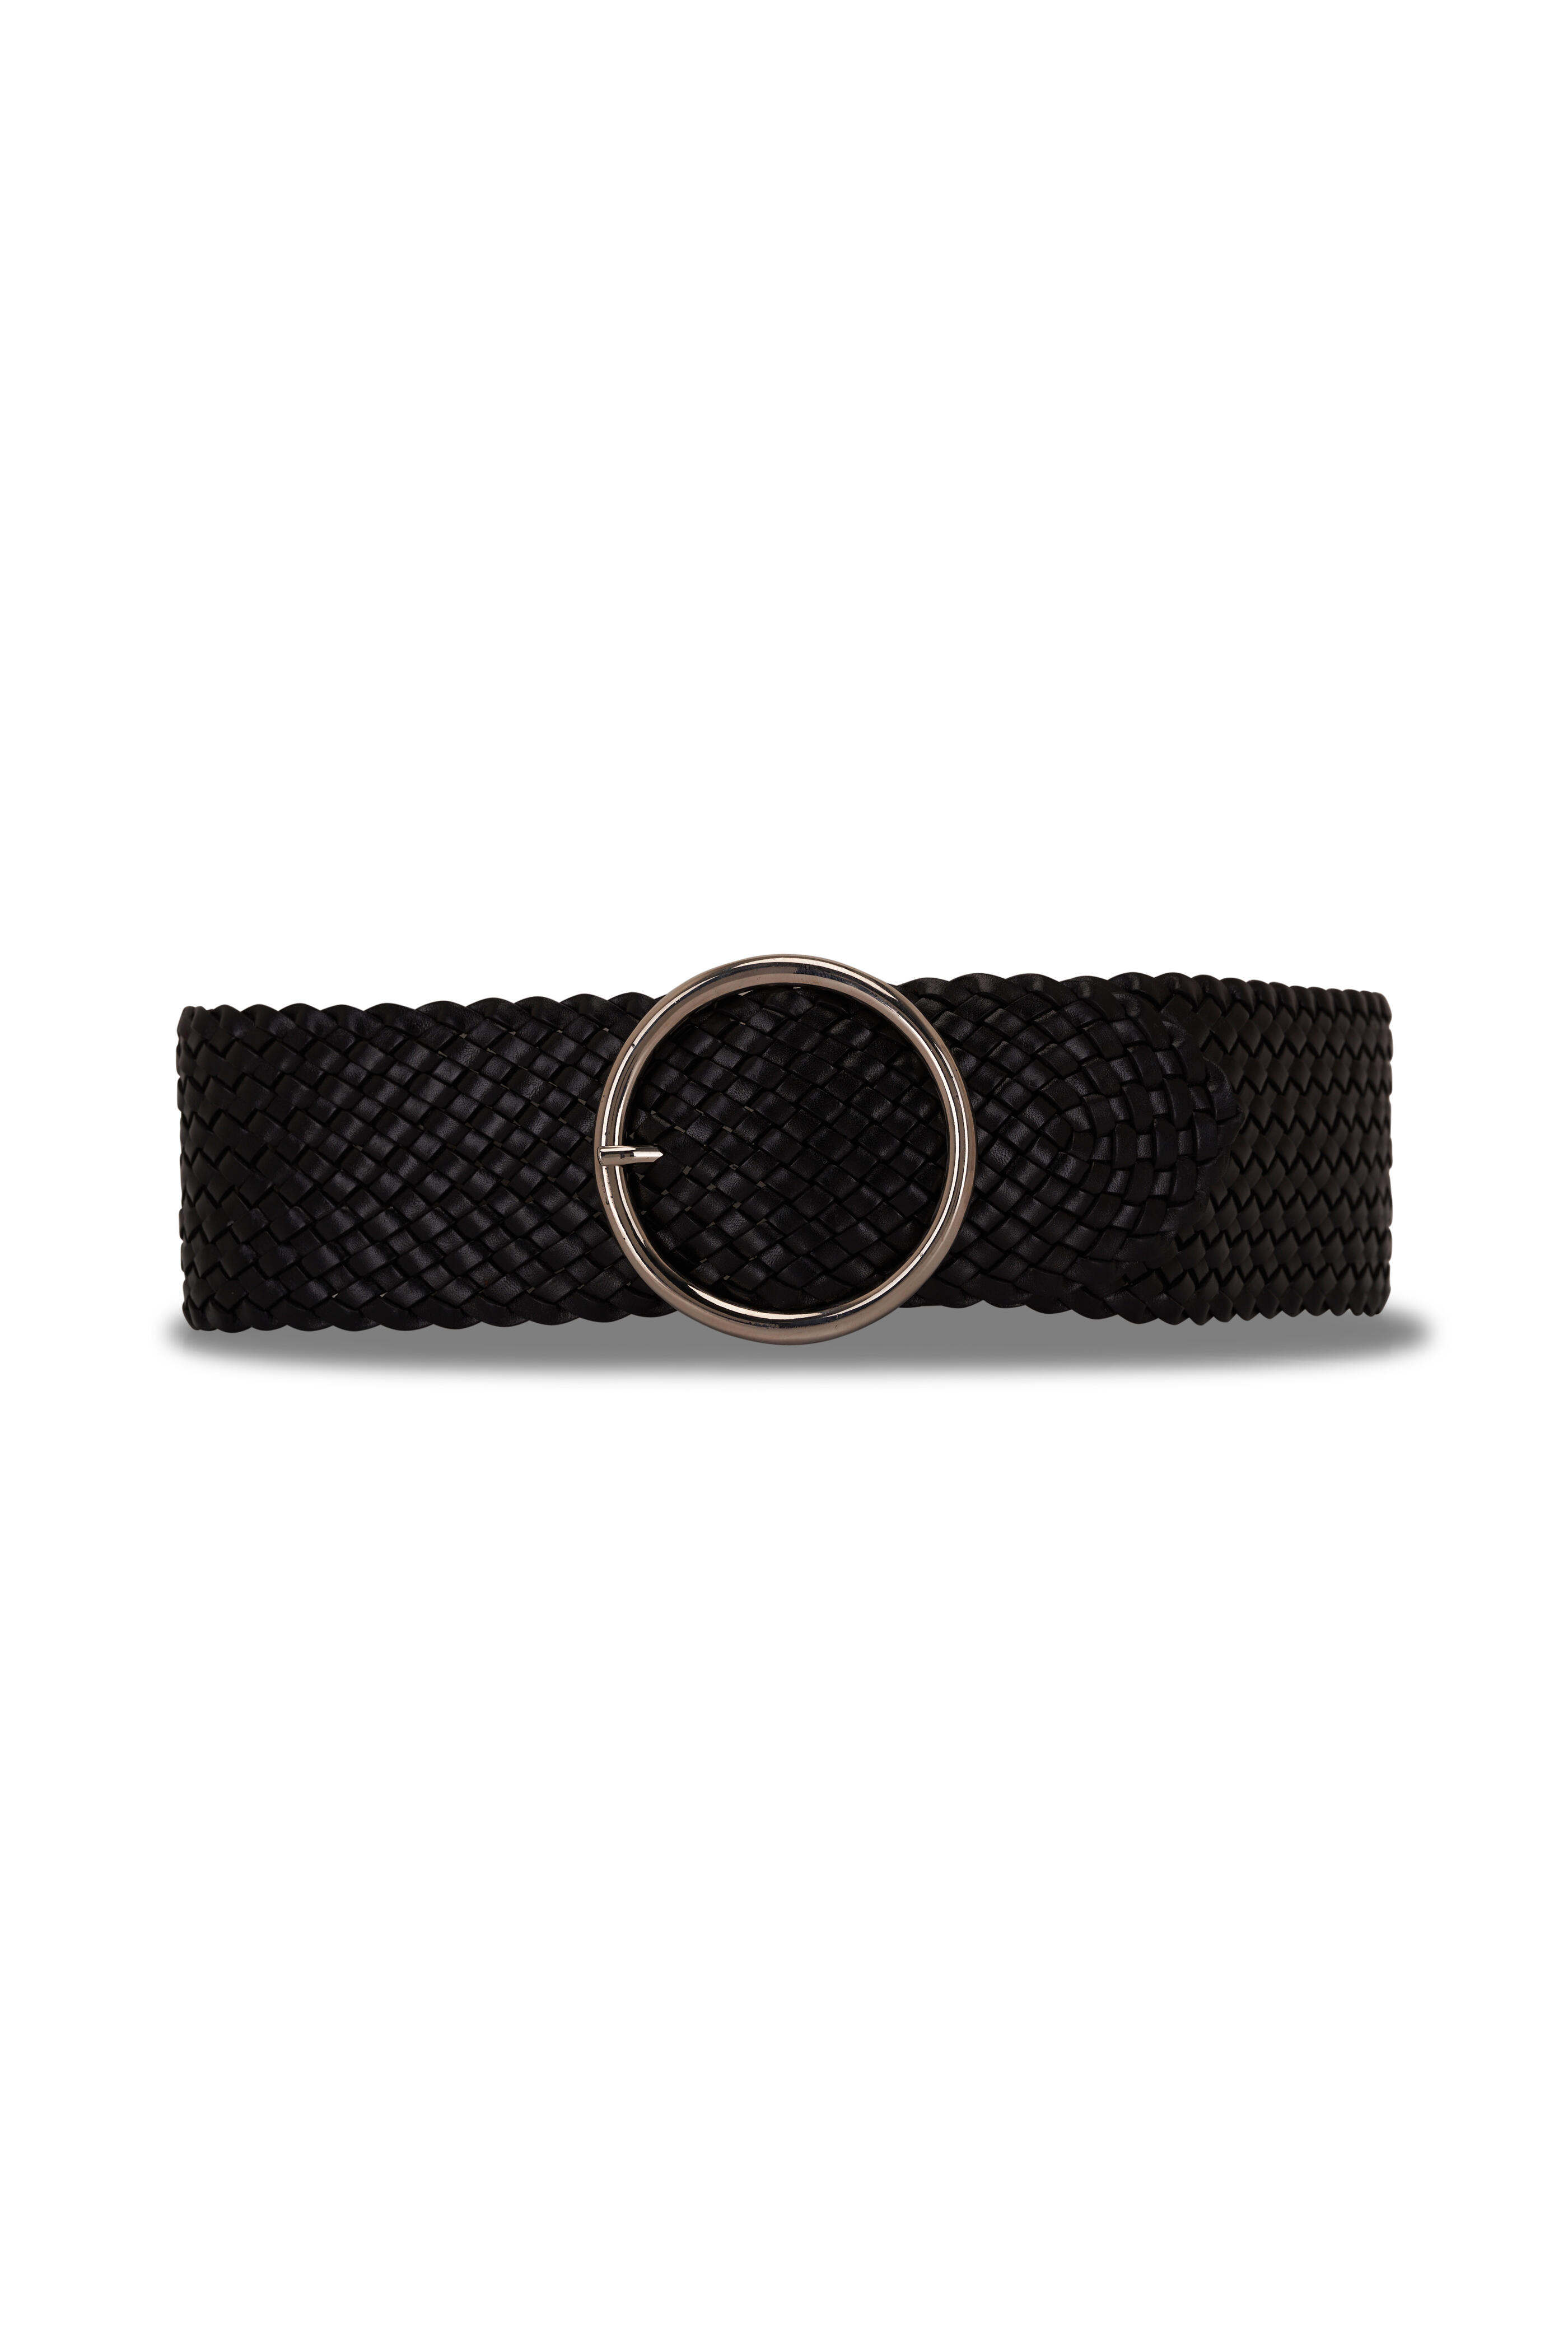 Anderson's Braided Leather Belt: Black